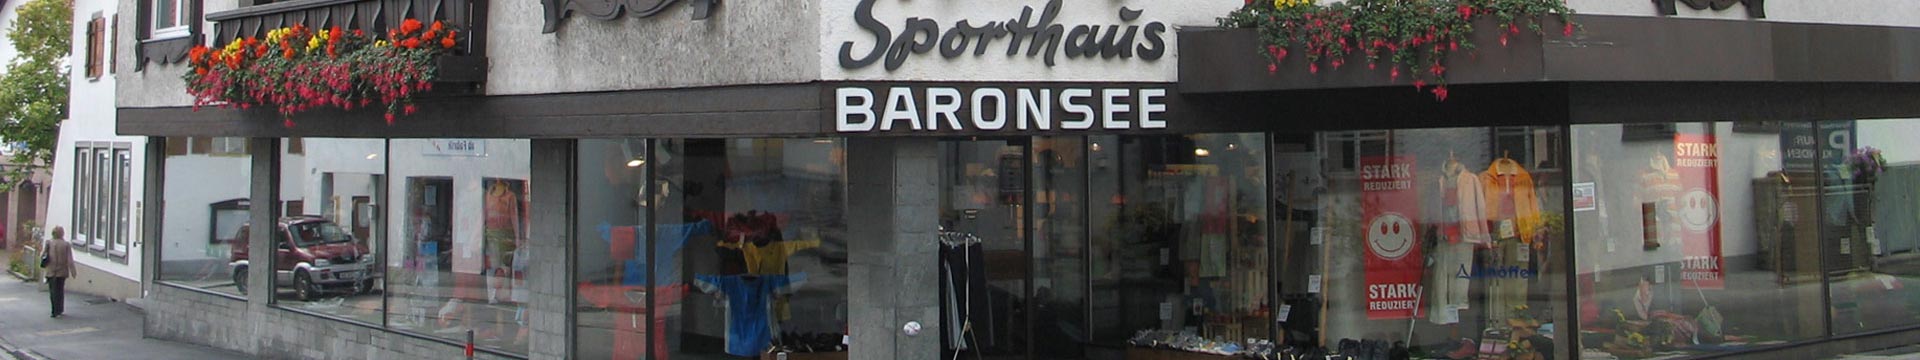 Sporthaus Baronsee in Nesselwang